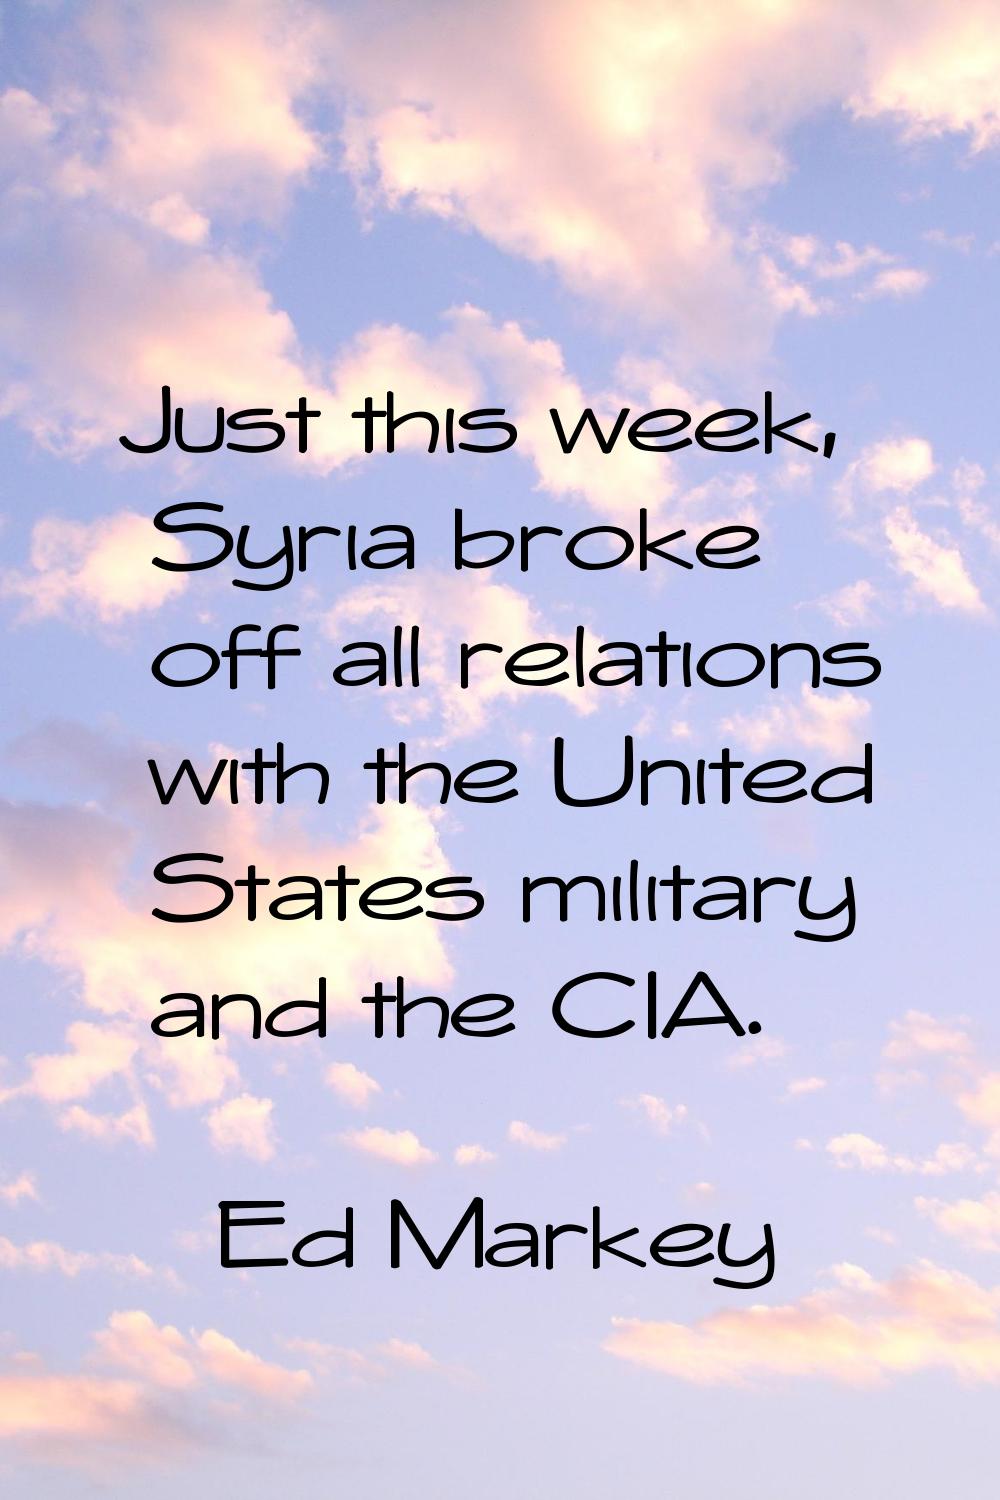 Just this week, Syria broke off all relations with the United States military and the CIA.